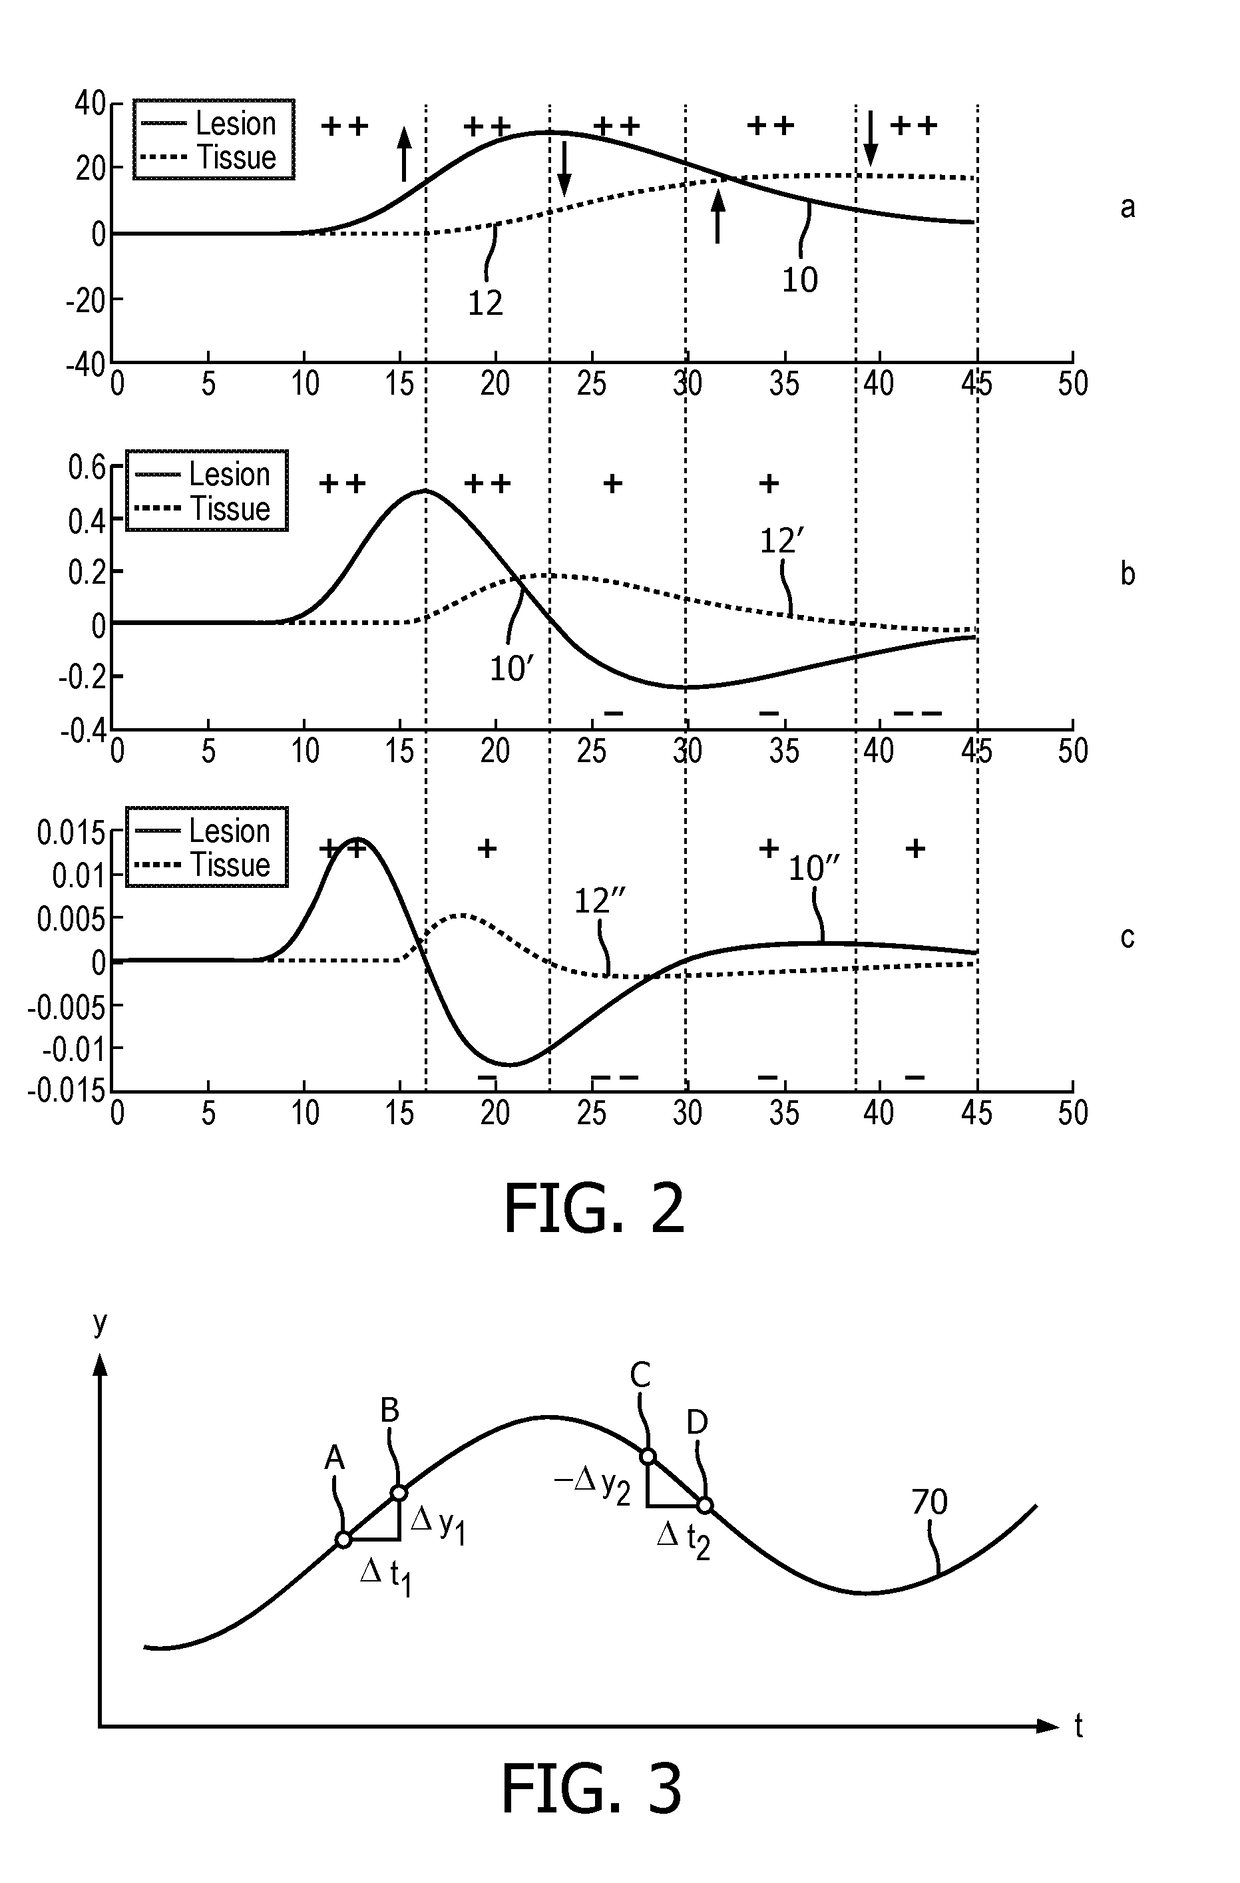 Time-based parametric contrast enhanced ultrasound imaging system and method